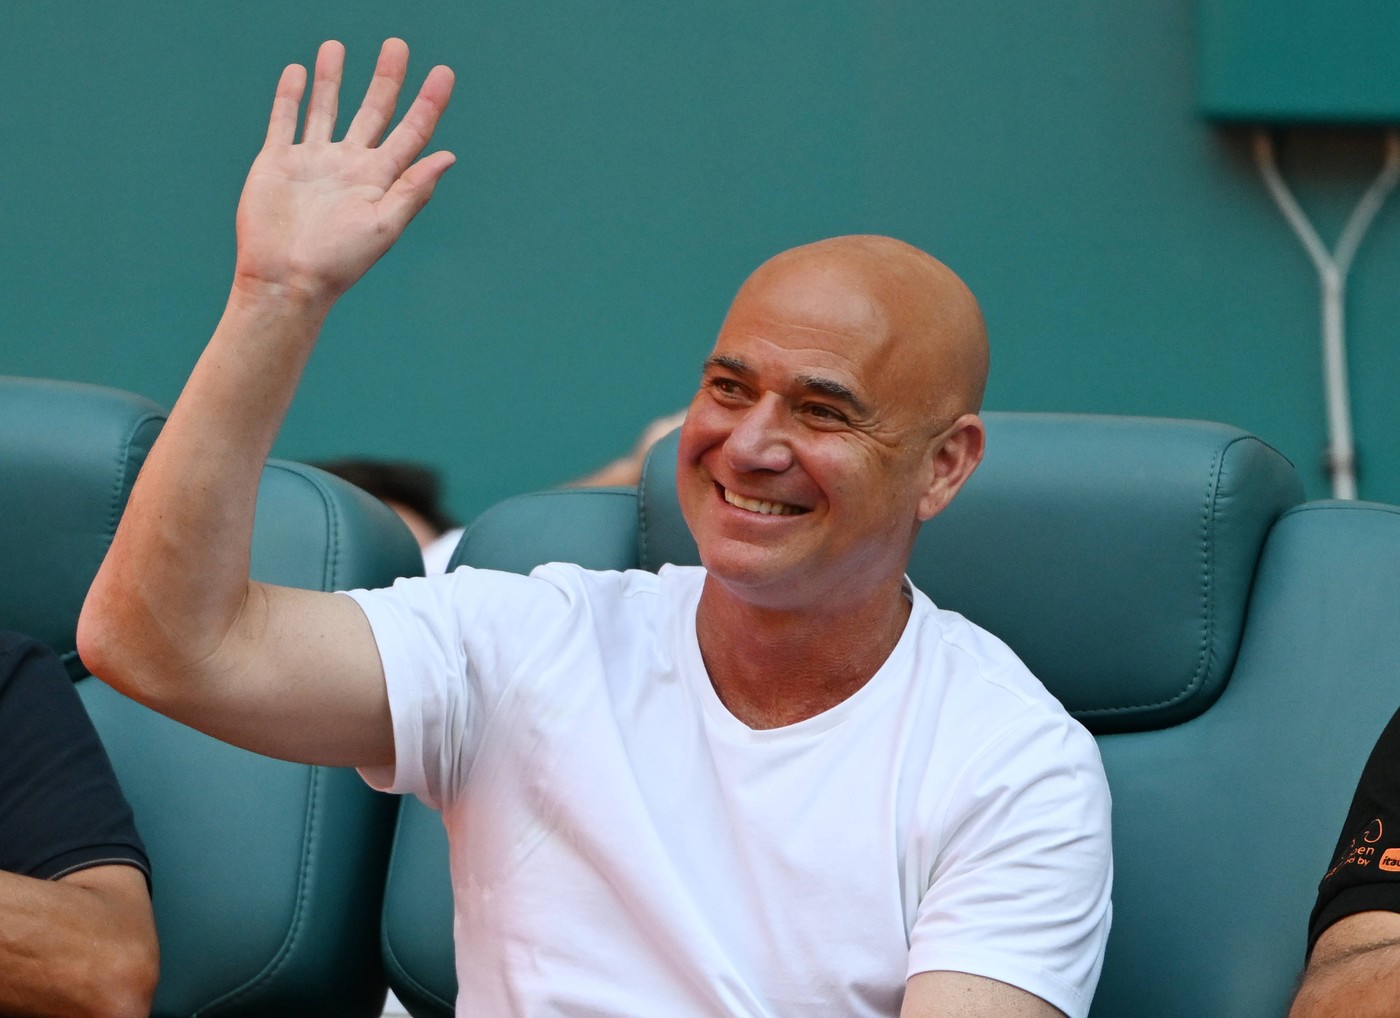 MIAMI GARDENS FL - MARCH 30: Andre Agassi is seen watching Danielle Collins Vs Elena Rybakina during women s finals at The Miami Open at Hard Rock Stadium on March 30, 2024 in Miami Gardens, Florida. Copyright: xx,Image: 862267106, License: Rights-managed, Restrictions: Credit images as 